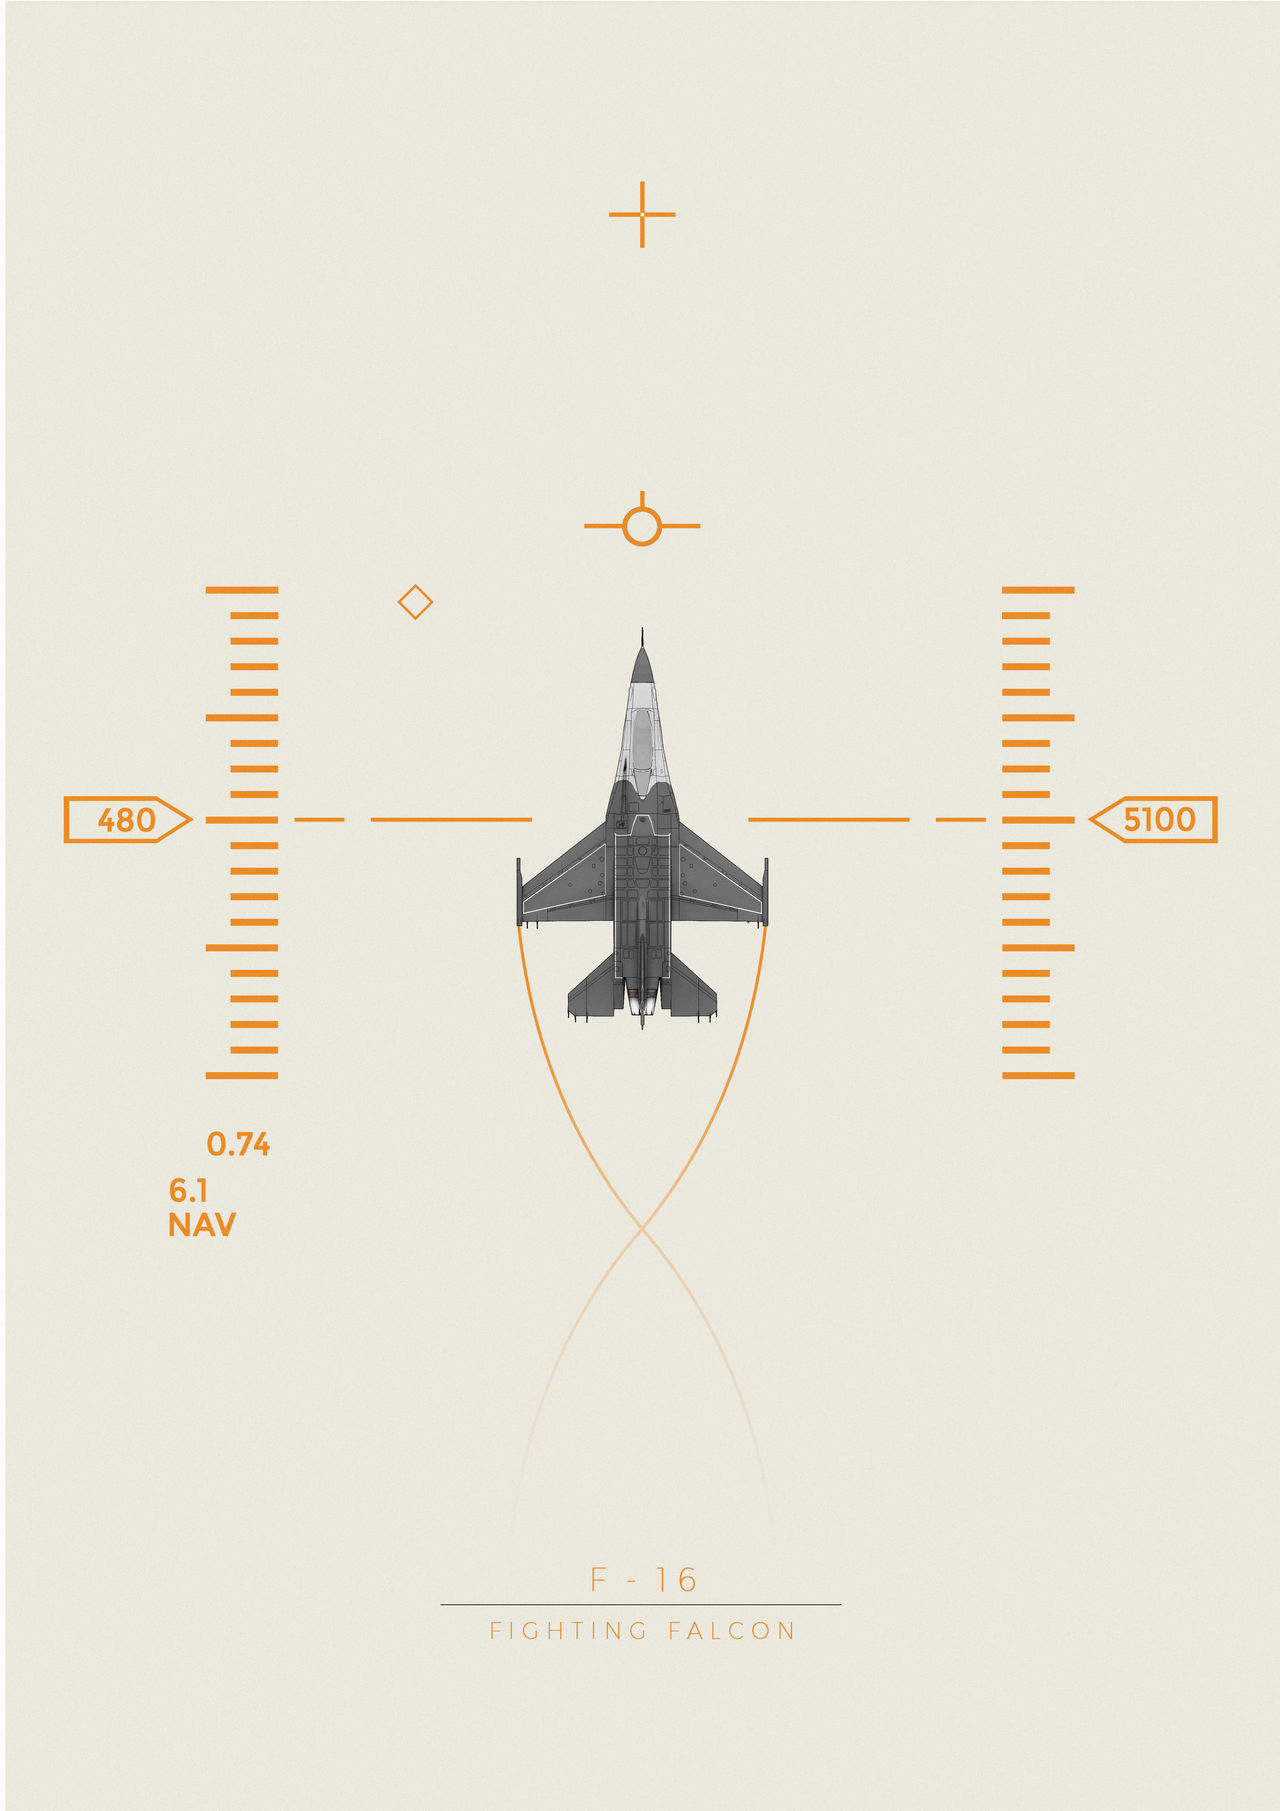 F-16 Fighting Falcon by Noble6Design on DeviantArt